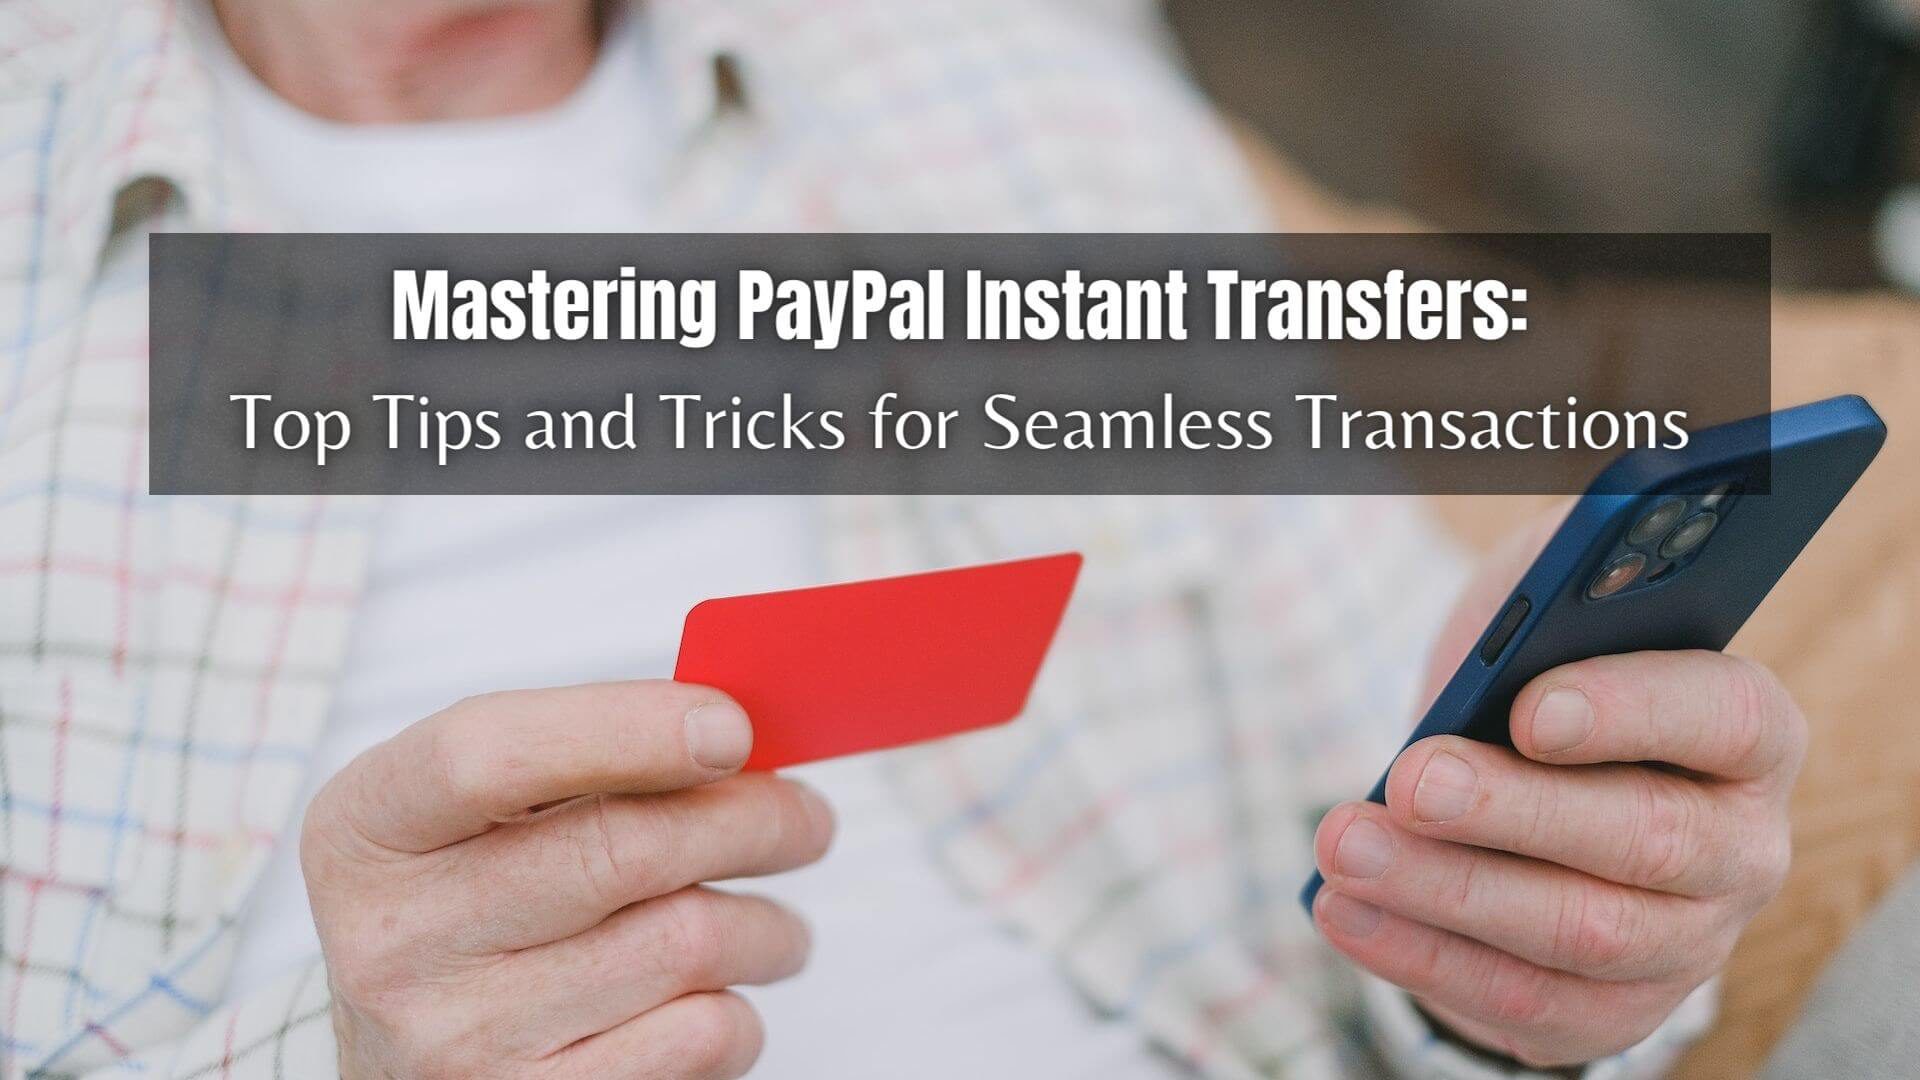 A PayPal instant transfer allows PayPal users to quickly transfer funds from their PayPal account to their bank account. Learn how!